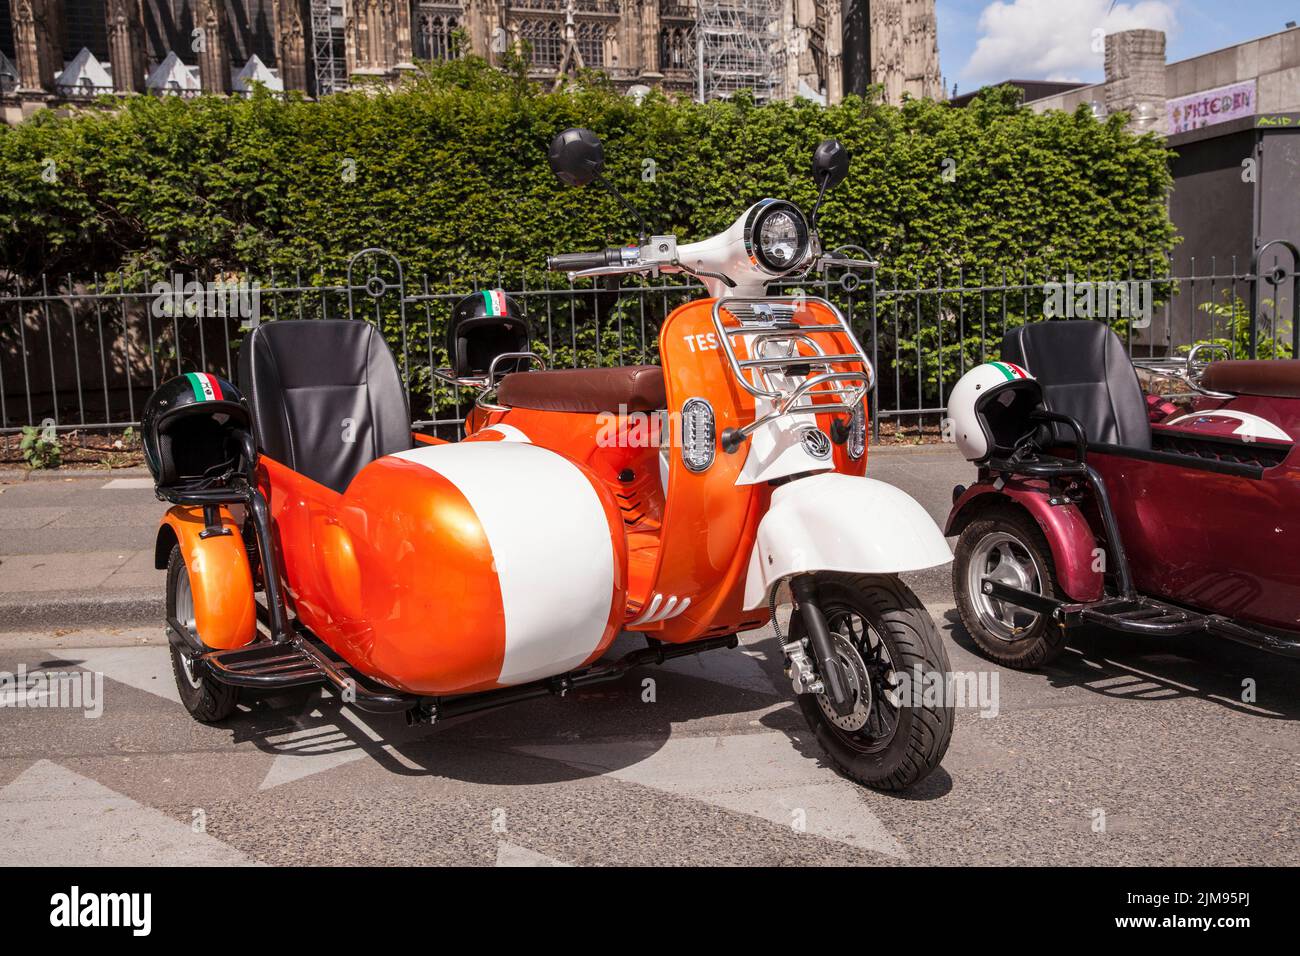 E-Vespina scooters with sidecars are available for rent for city tours near the cathedral, Cologne, Germany. E-Vespina Roller mit Seitenwagen stehen z Stock Photo